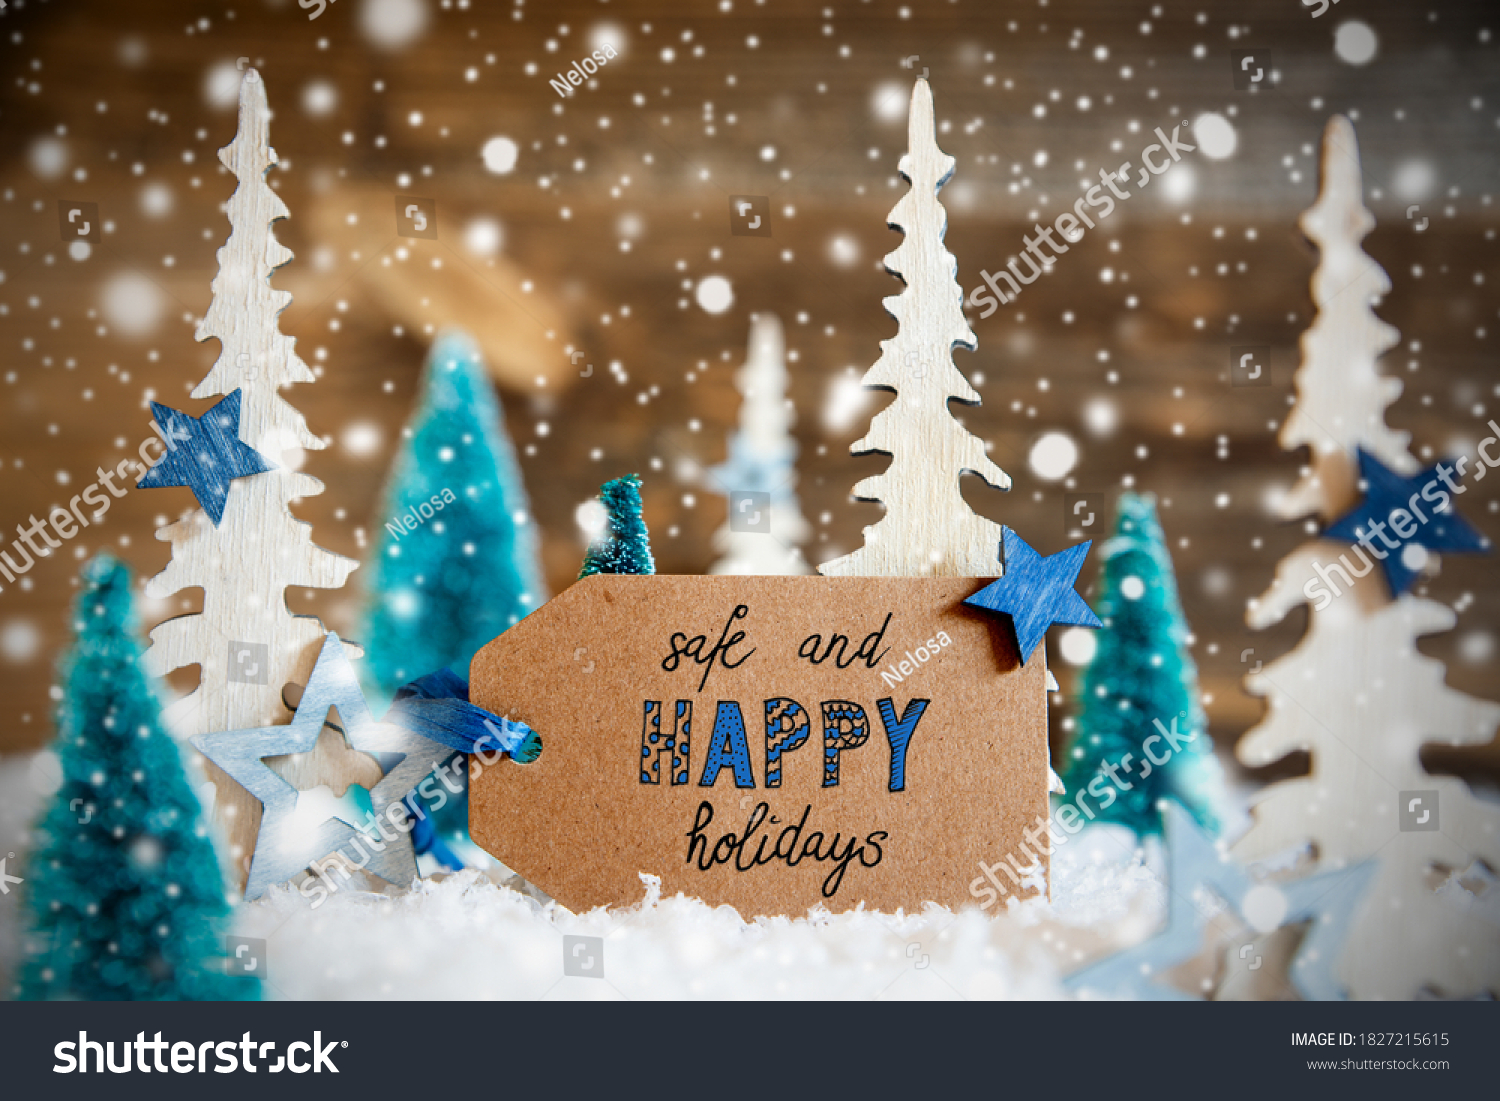 Christmas Trees, Snow, Label With Text Safe And Happy Holidays, Snowflakes #1827215615